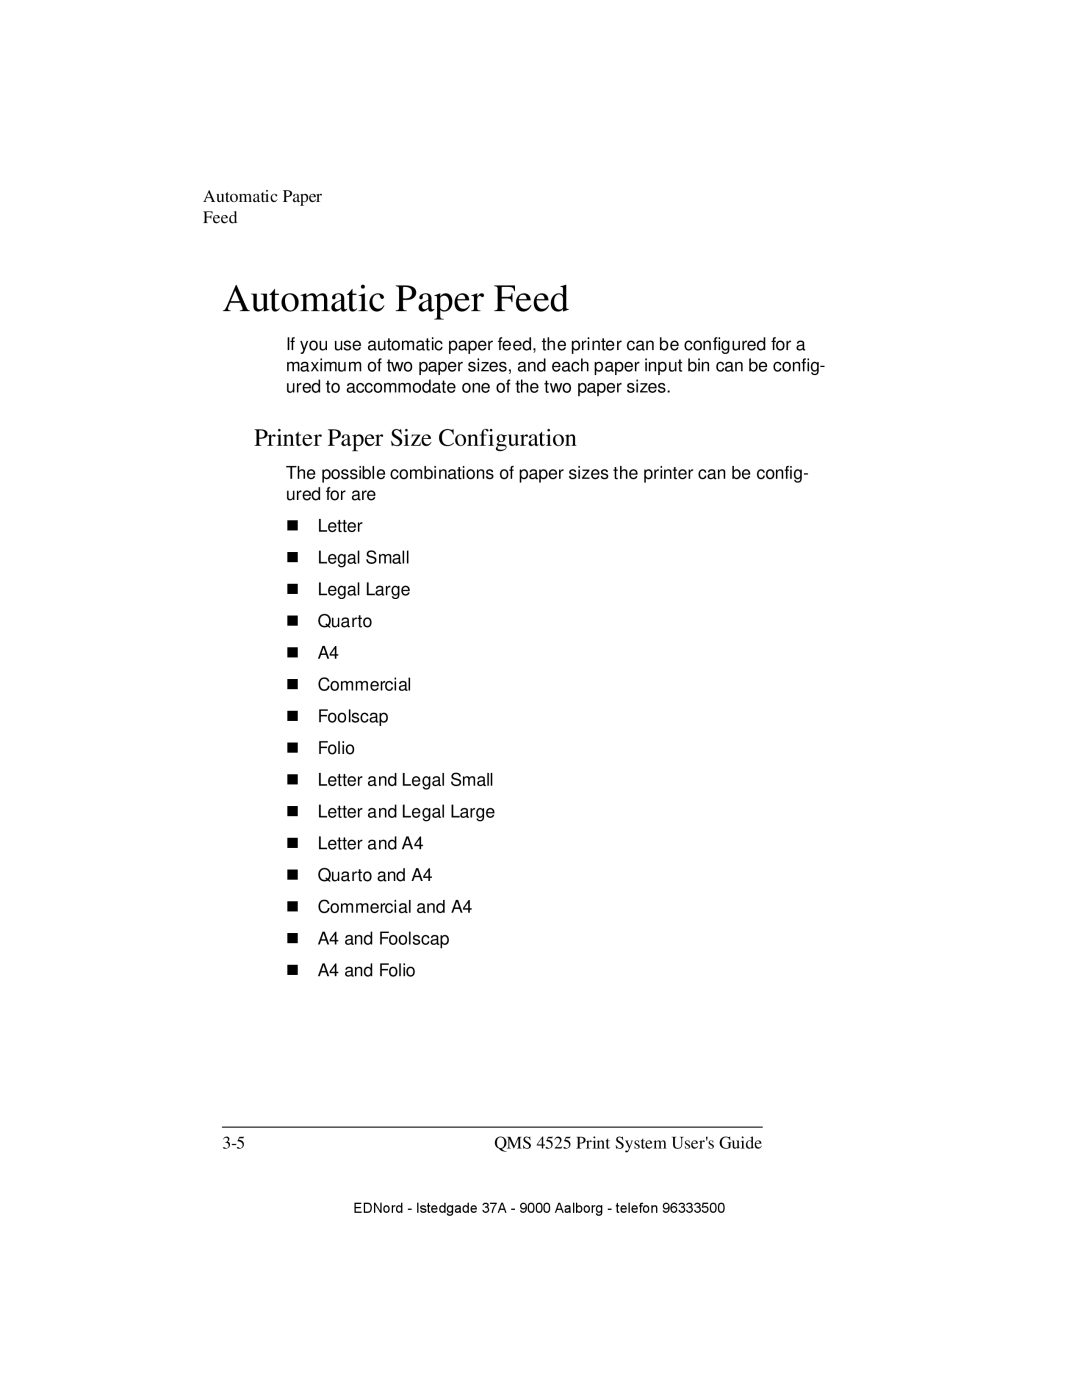 IBM QMS 4525 manual Automatic Paper Feed, Printer Paper Size Configuration 